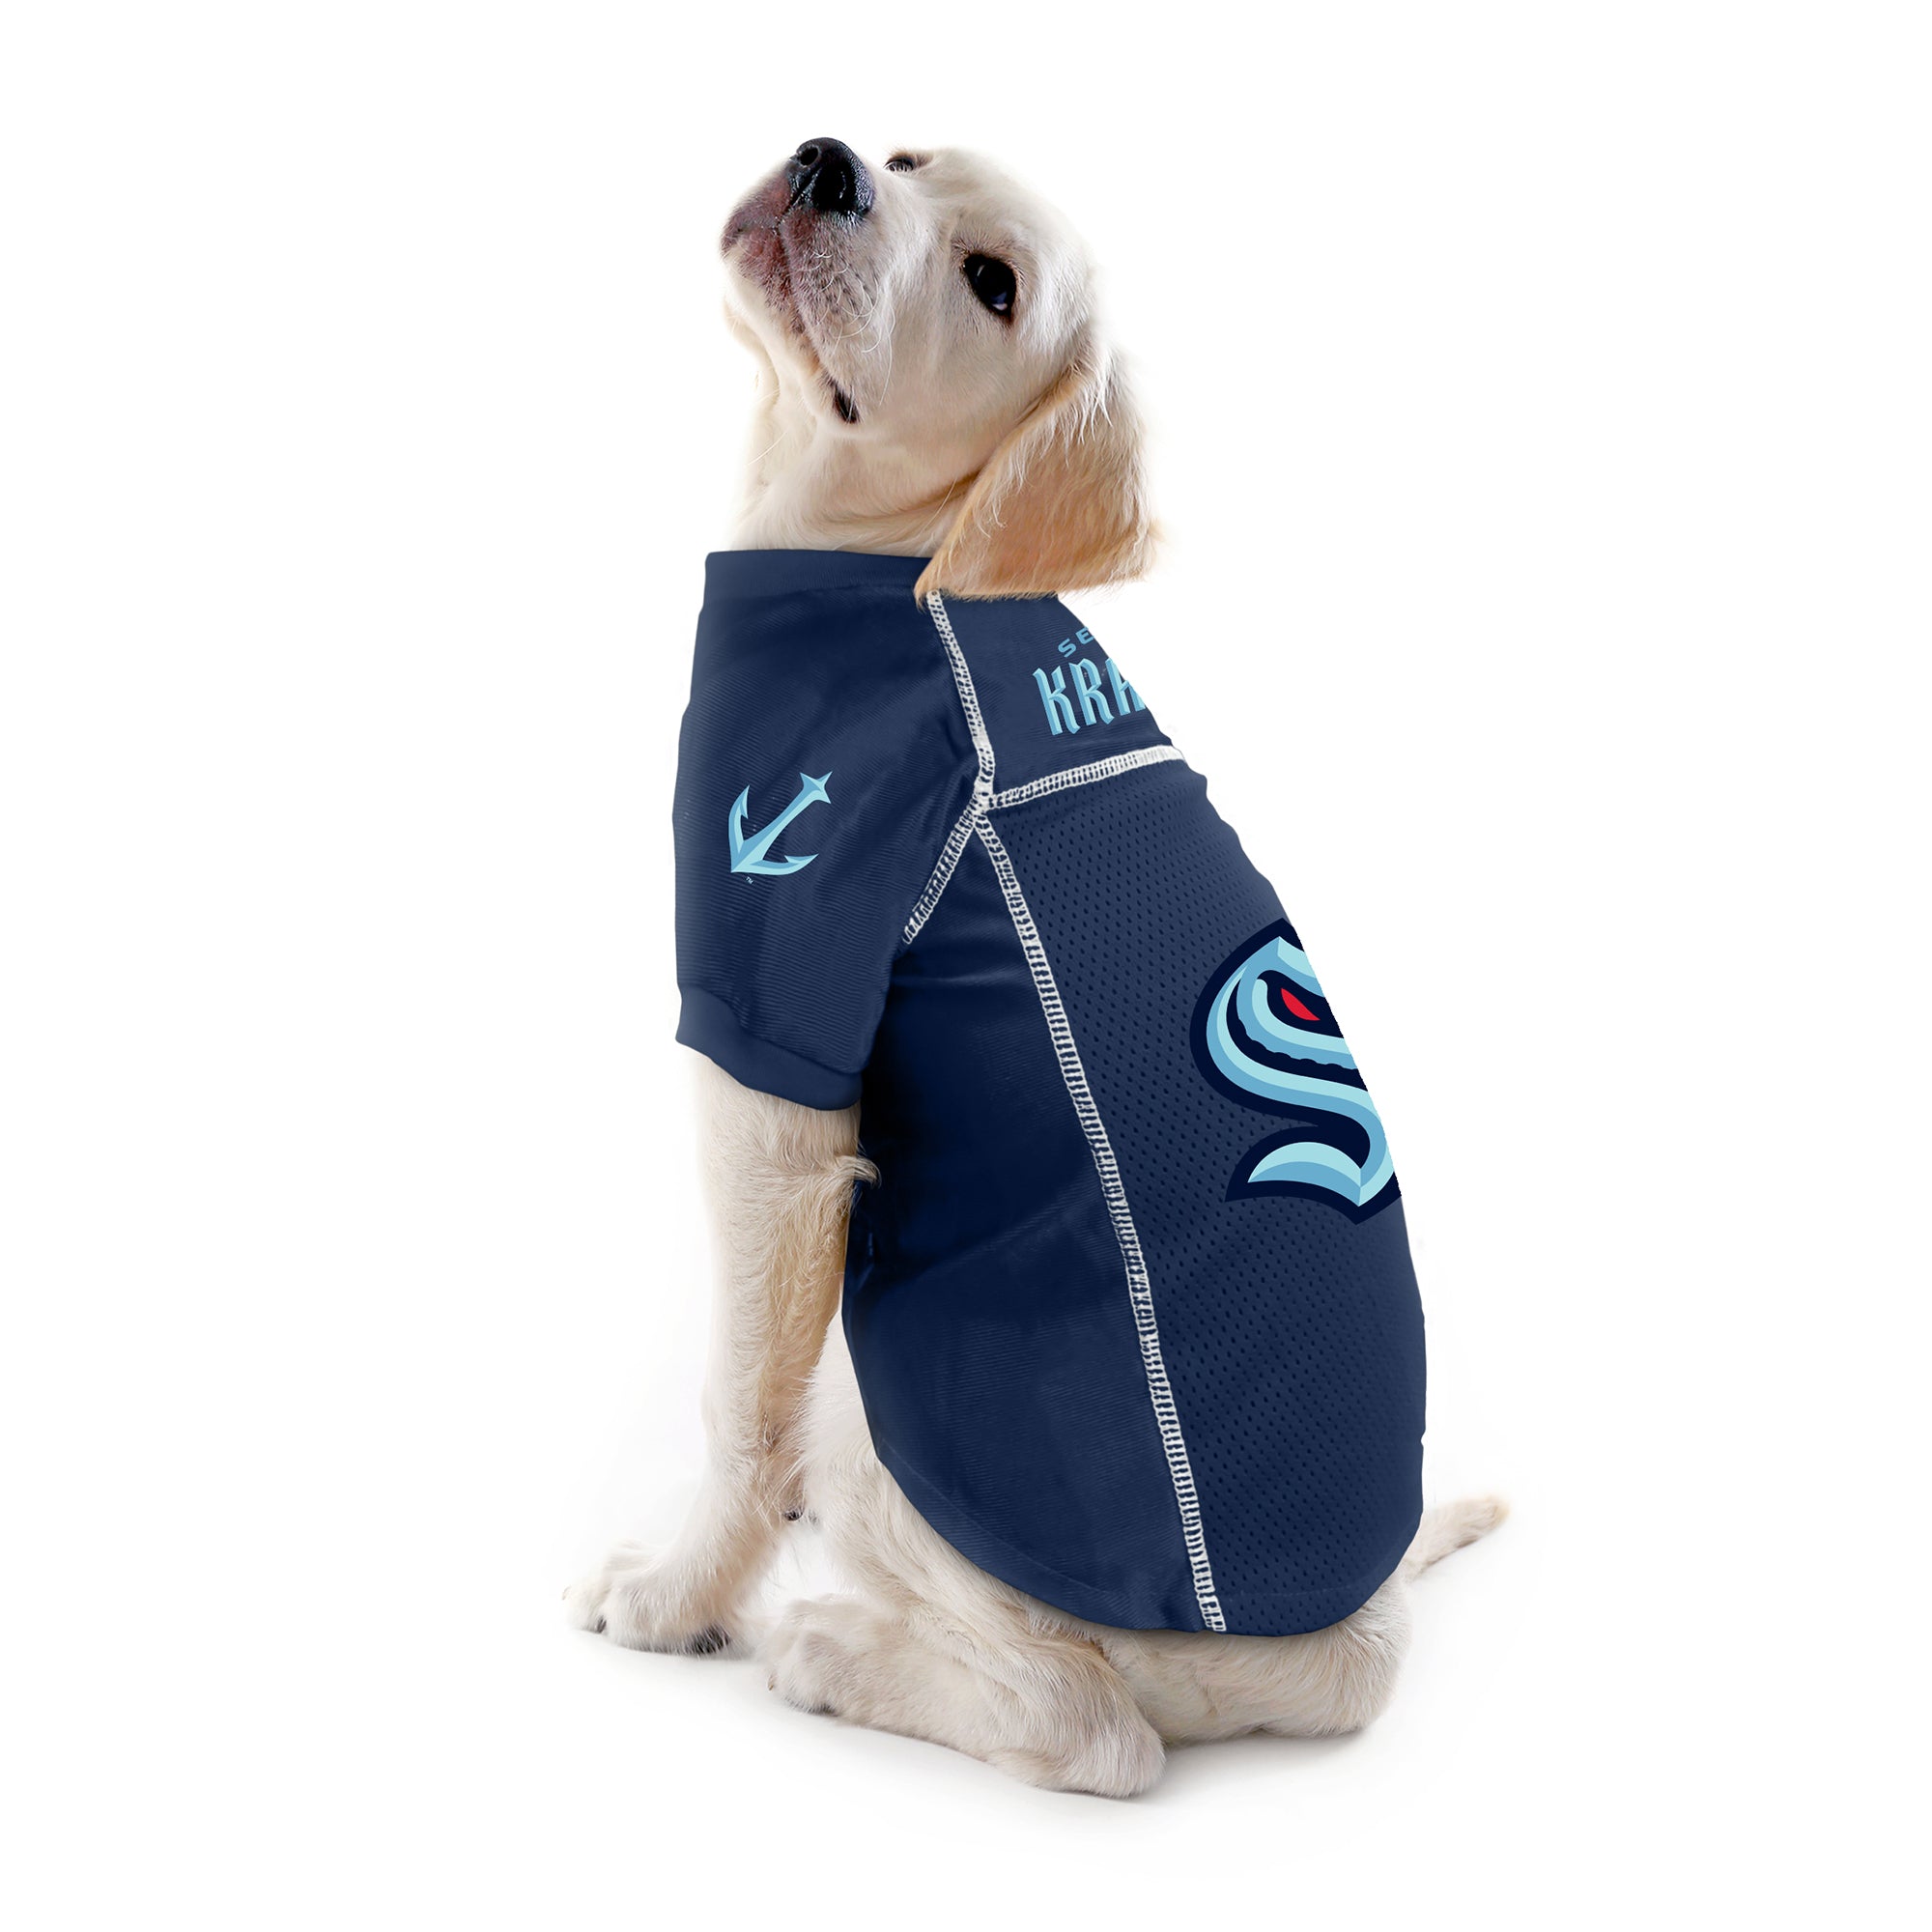  Pets First Dog TEE Shirt; NHL Seattle Kraken PET T-Shirt for  Dogs & Cats, Size: Small. Wrinkle-Free, Soft & Comfortable, Durable &  Washable WAM Shirt Dress Outfit for Your Cute